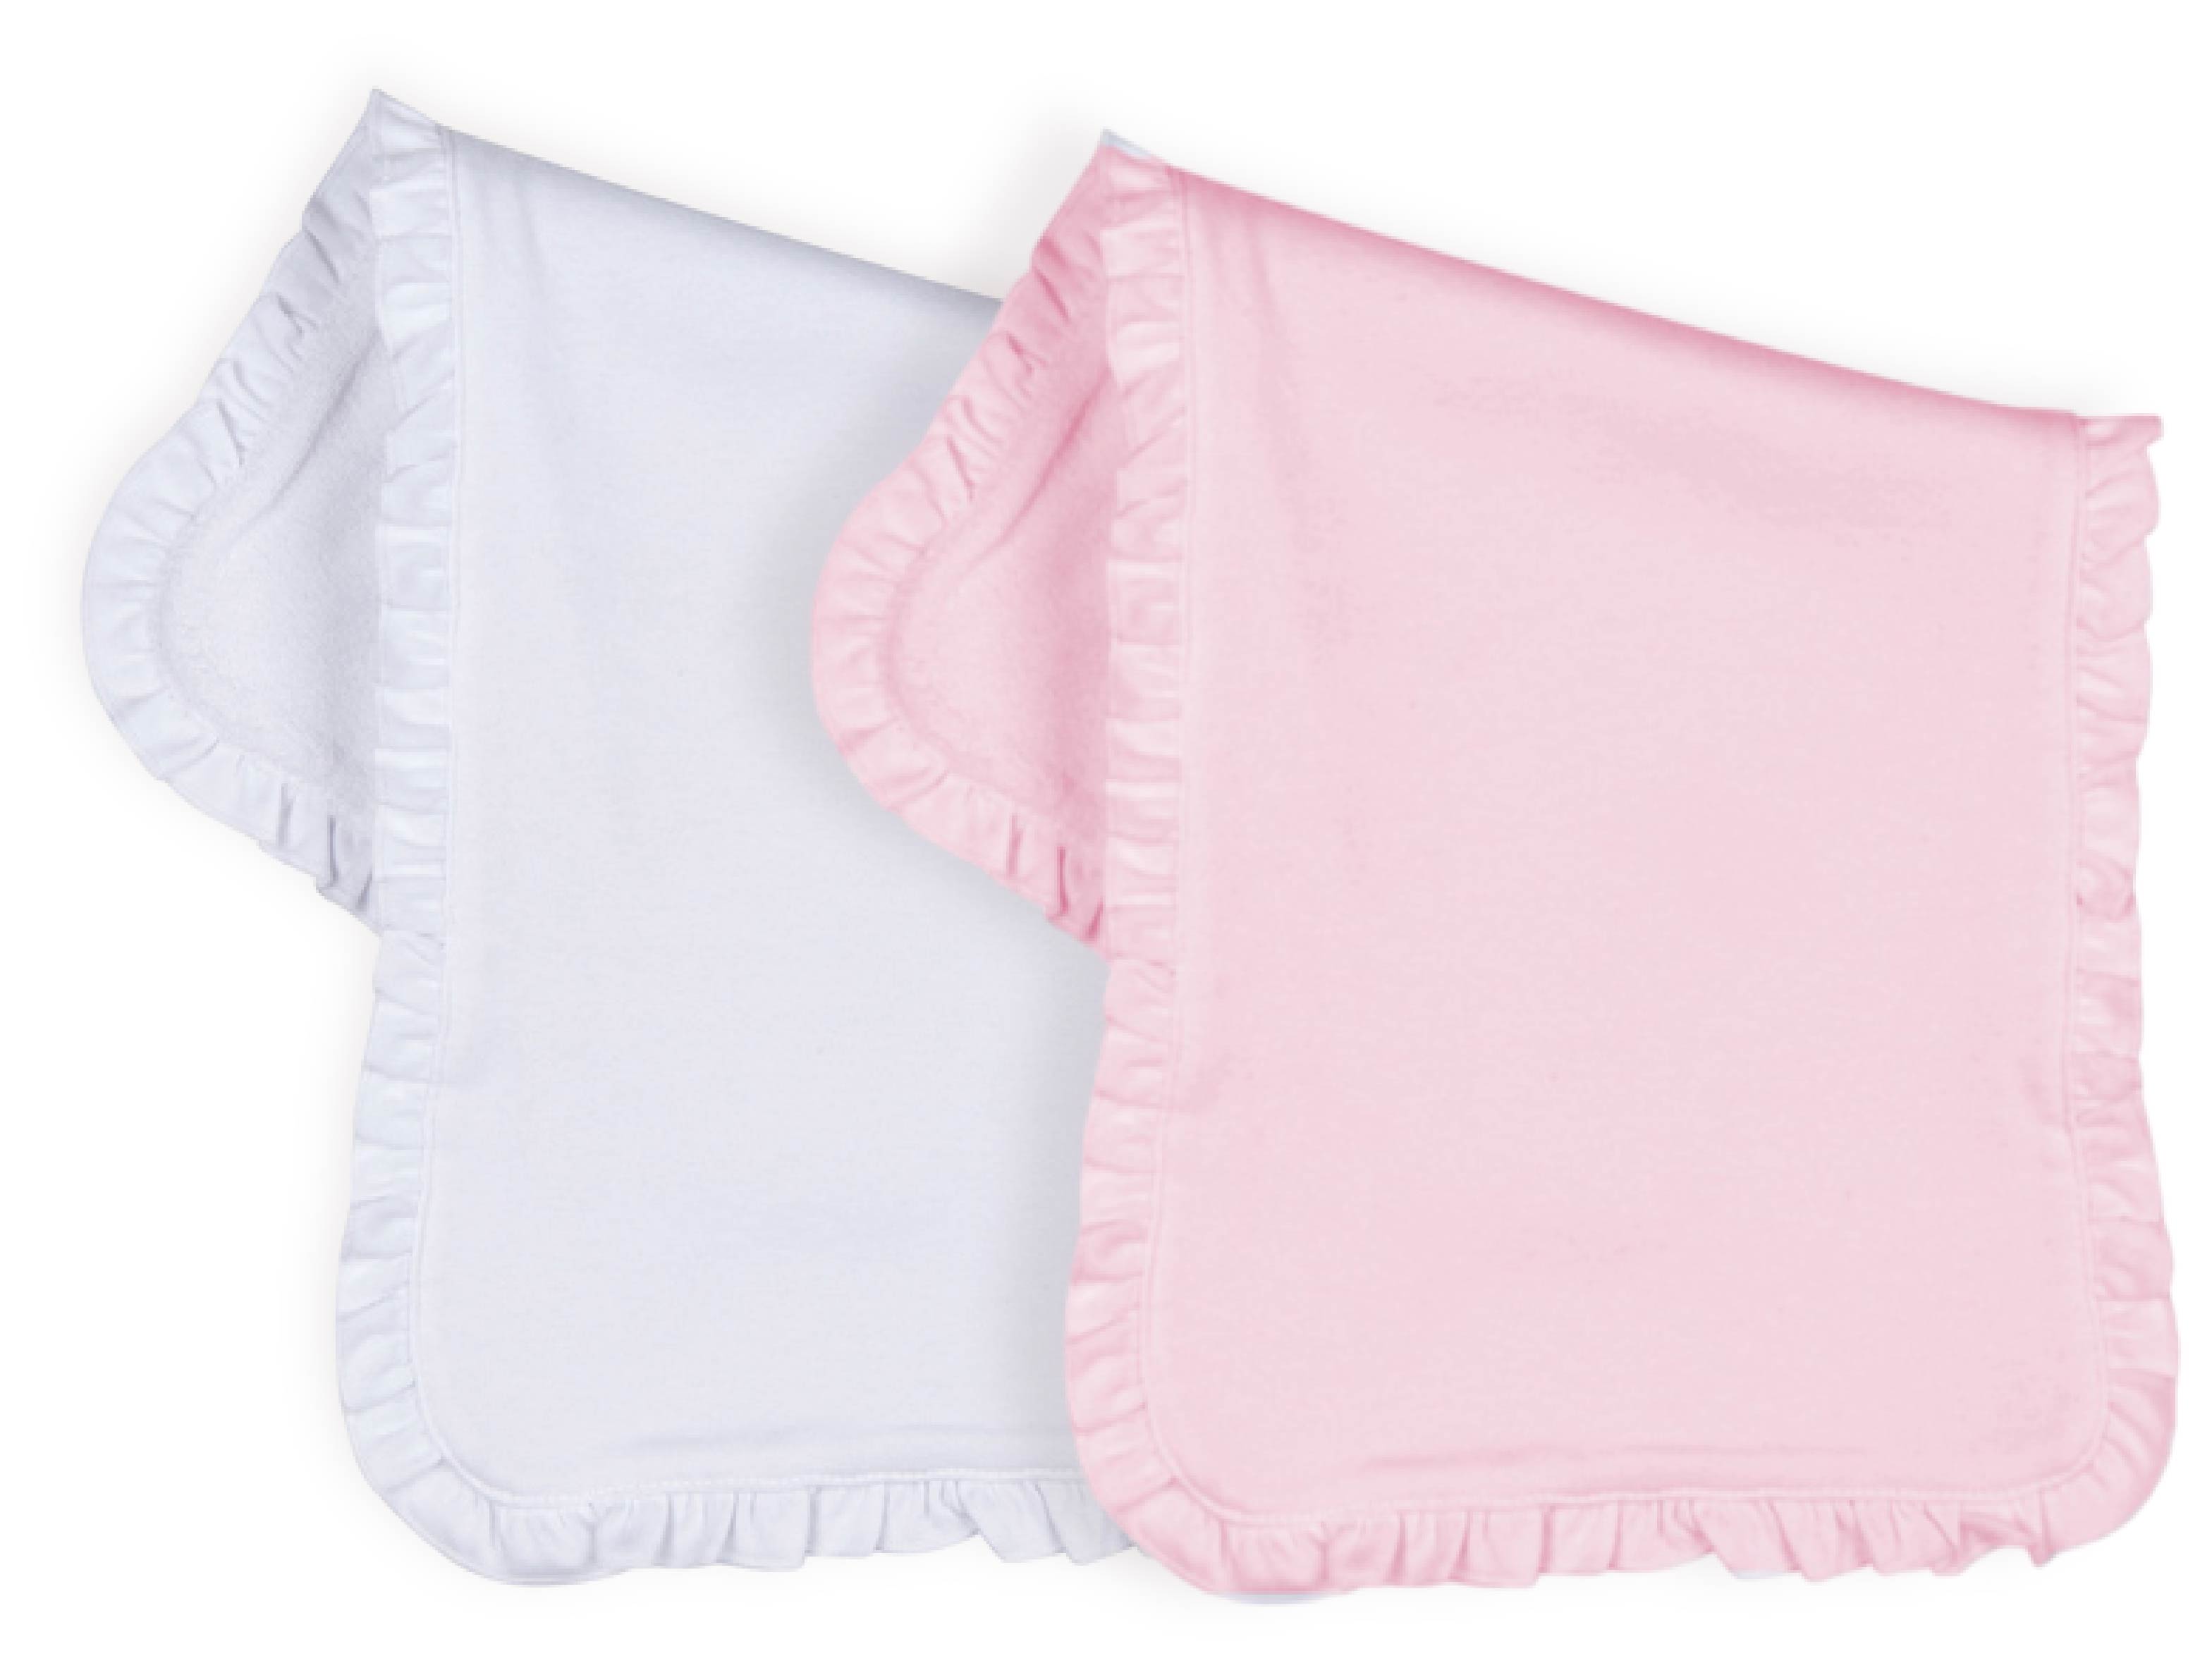 Large Sublimation Burp Cloths with Ruffle Trim (White / Pink), 85% Polyester / 15% Cotton